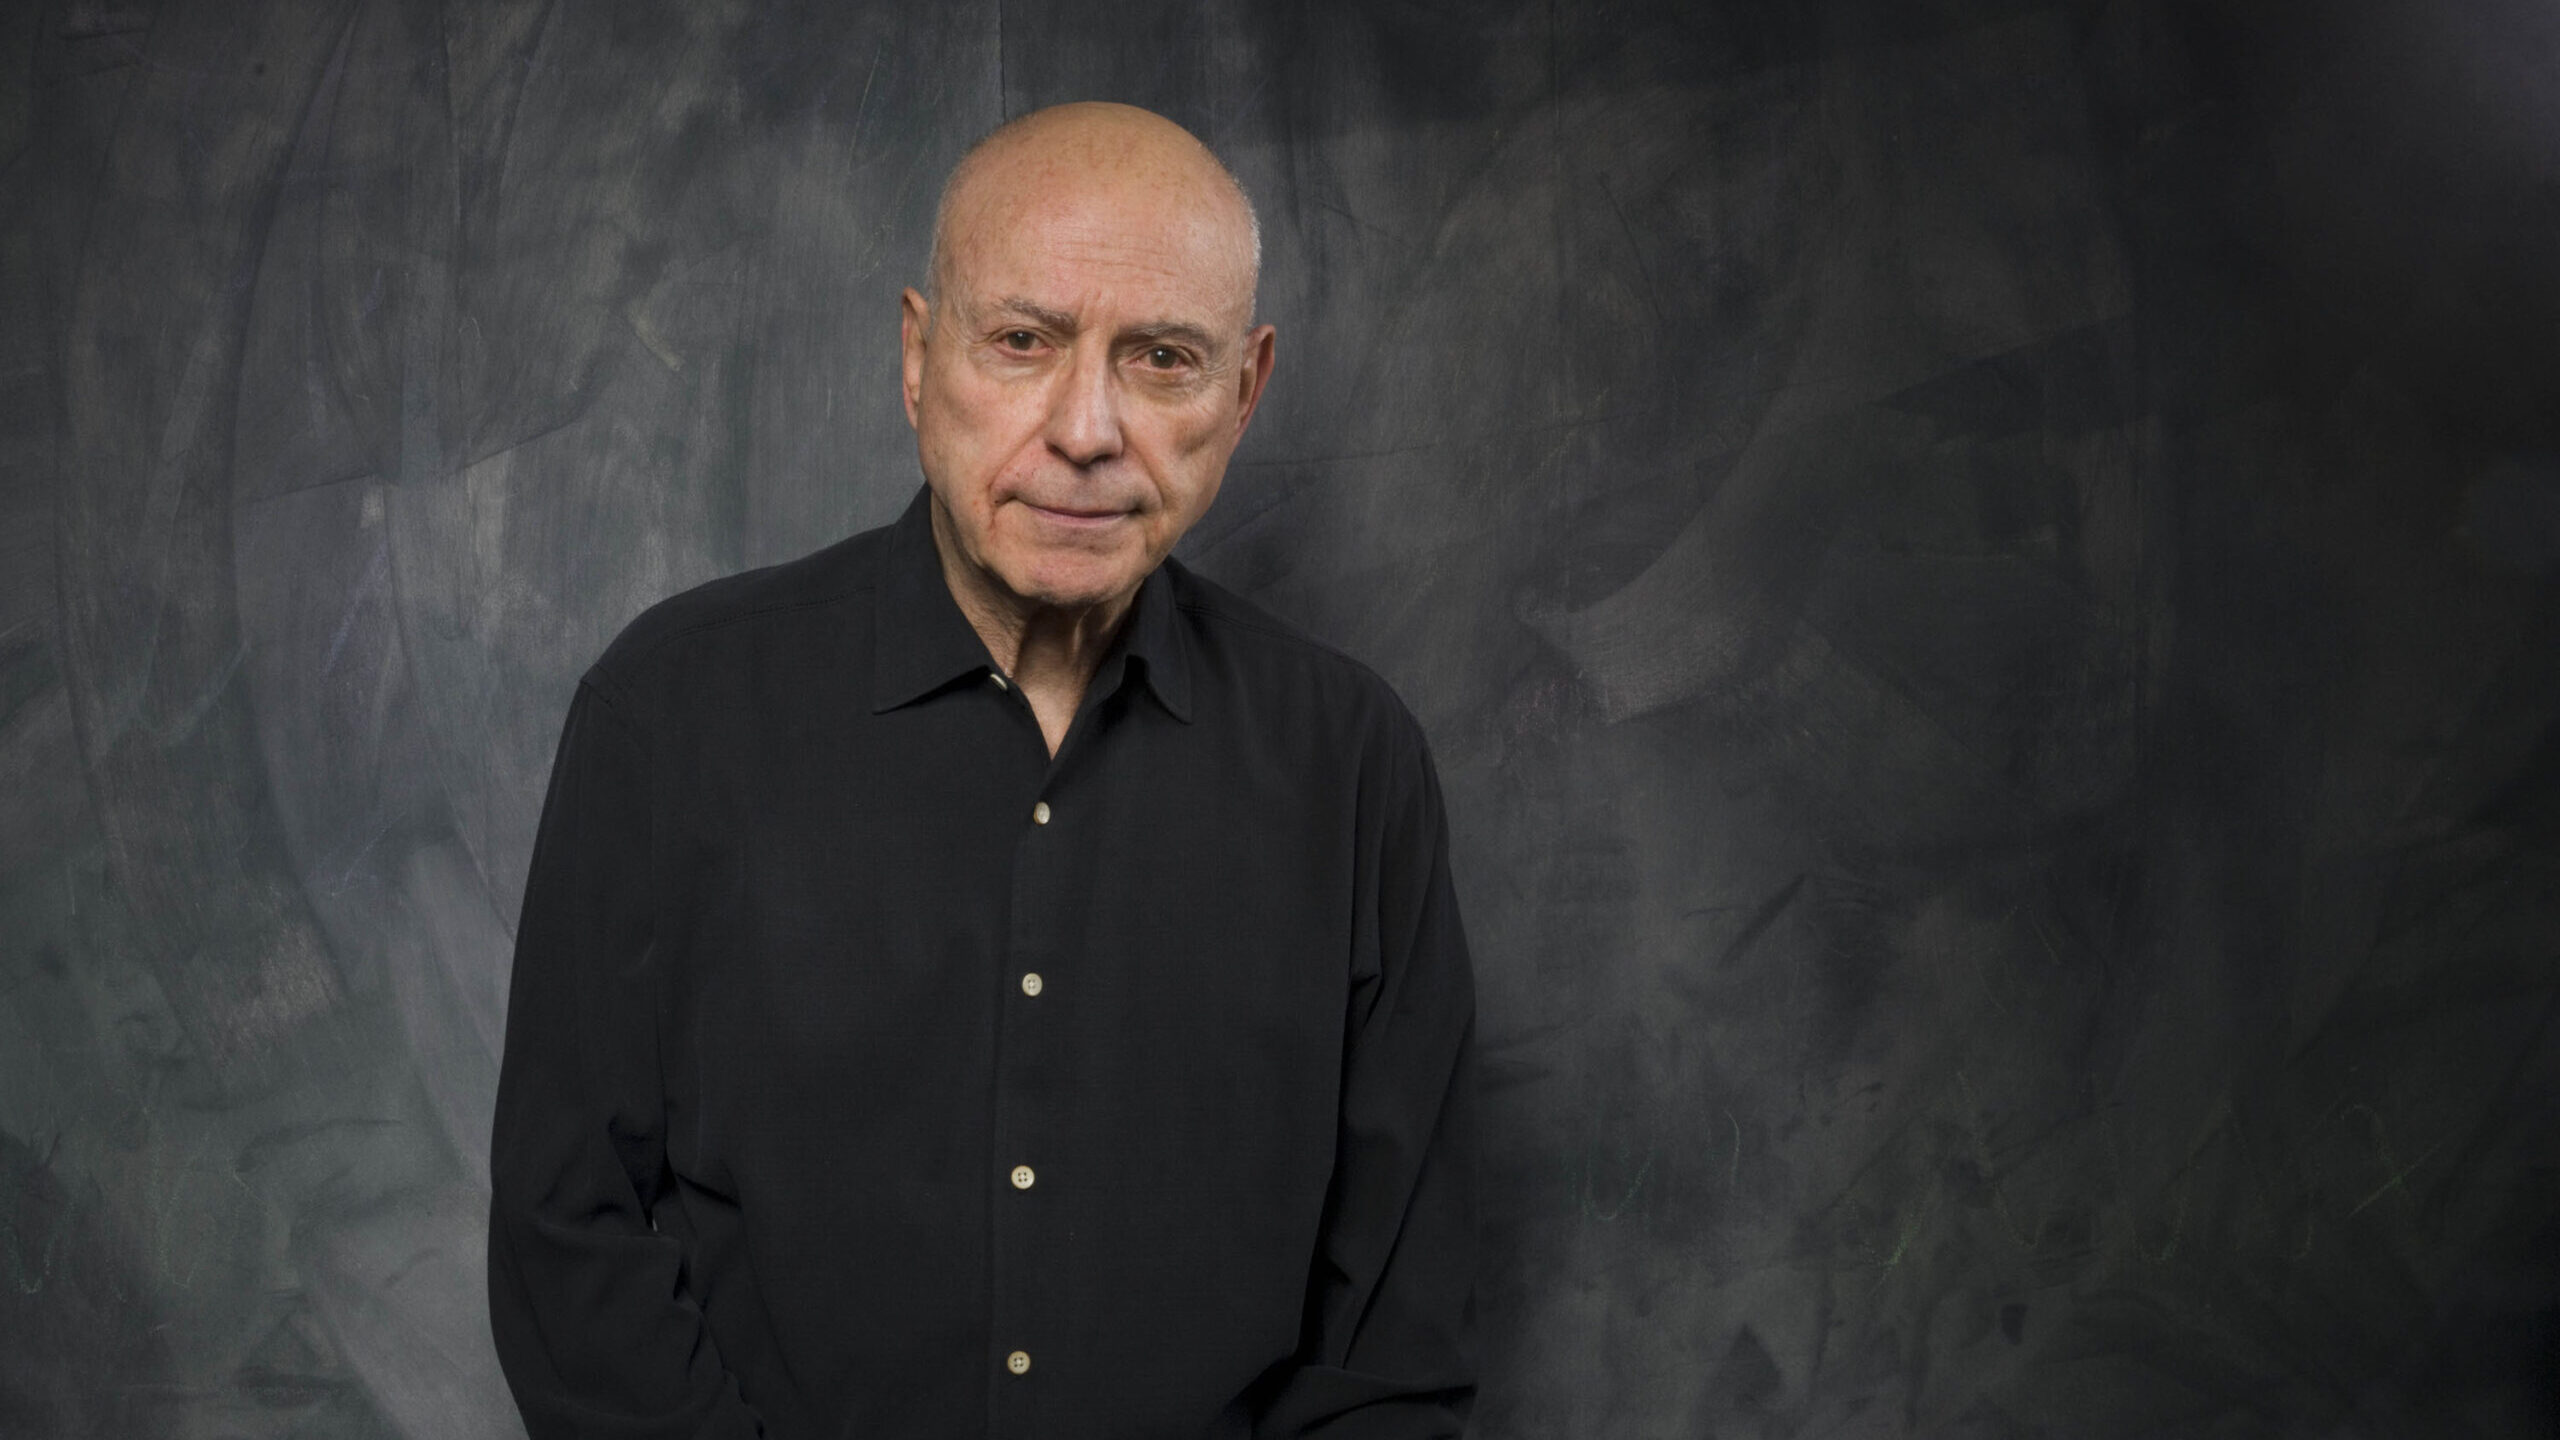 LOS ANGELES (AP) — Oscar winner Alan Arkin has died at age 89. The popular character actor was no...